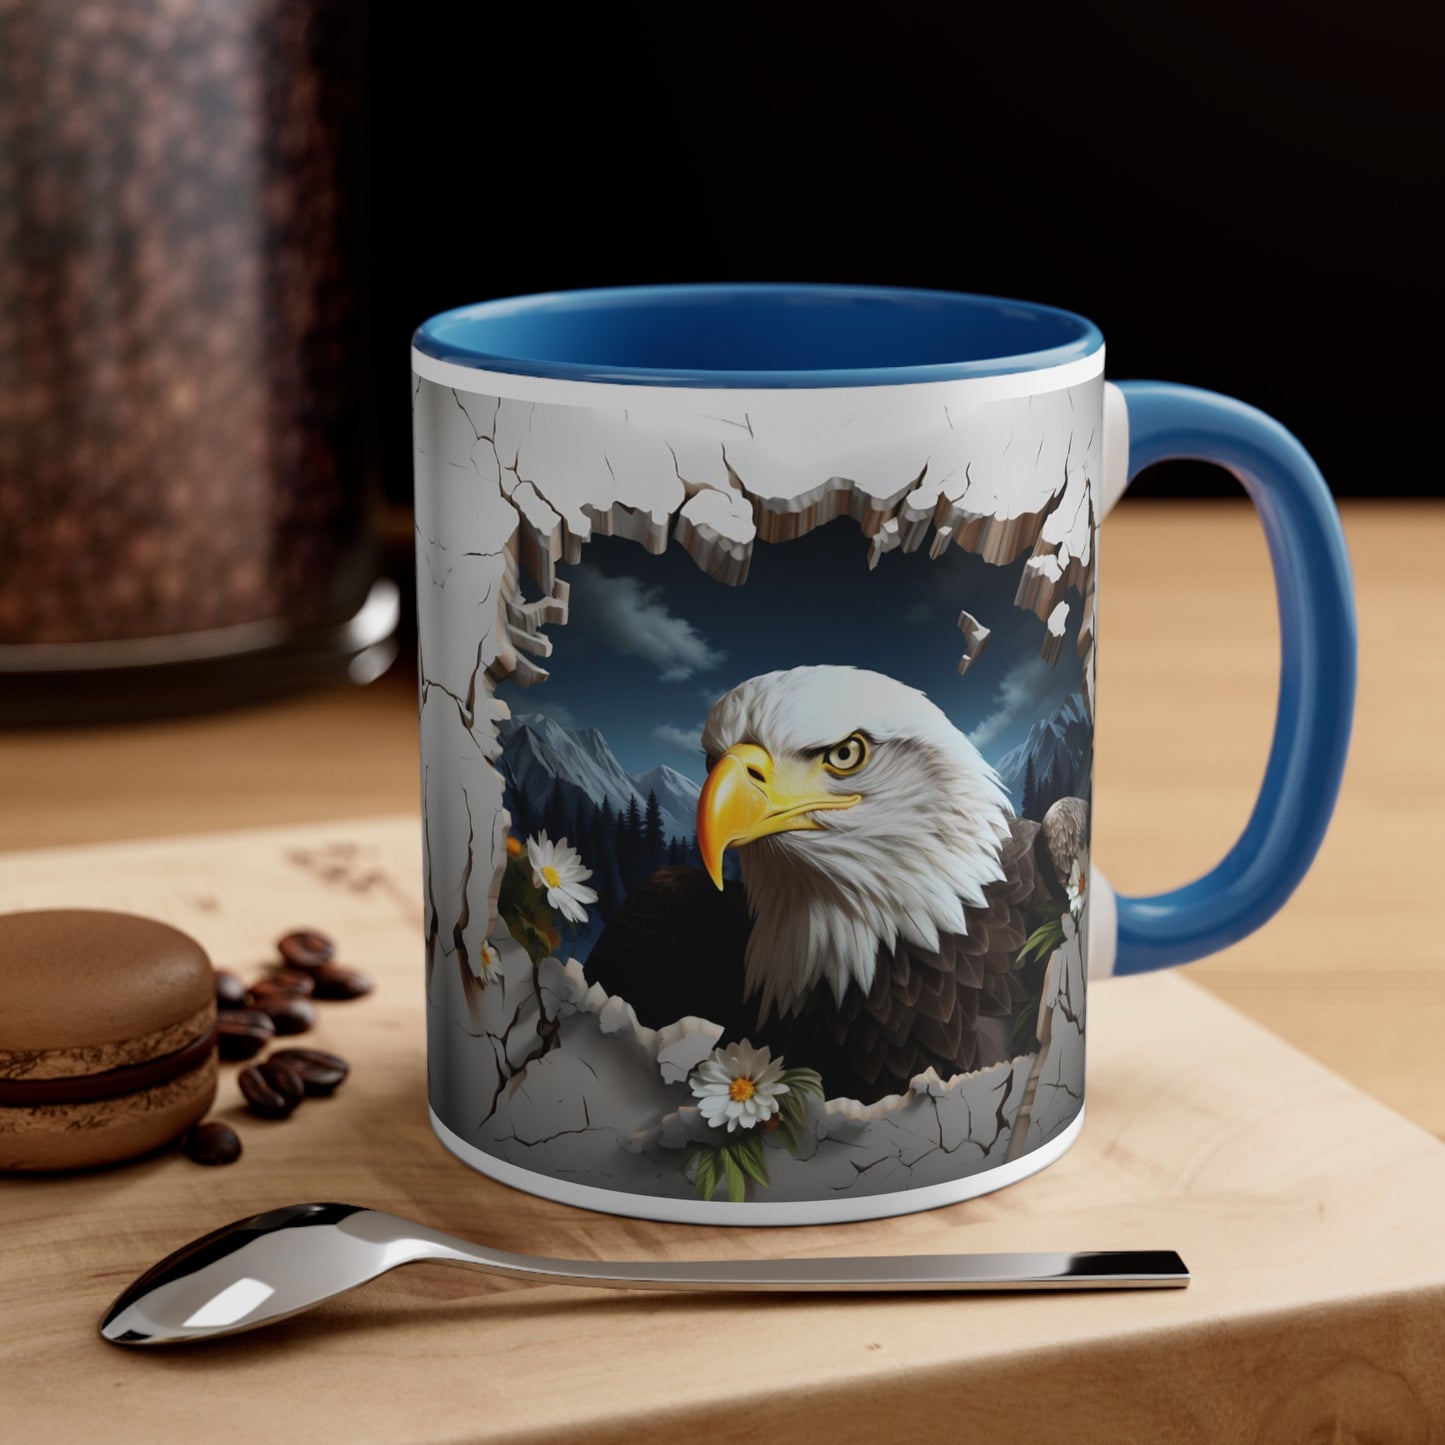 Awesome 3D Eagle Mug - Blue Accent - MUSGCITY - Free Shipping